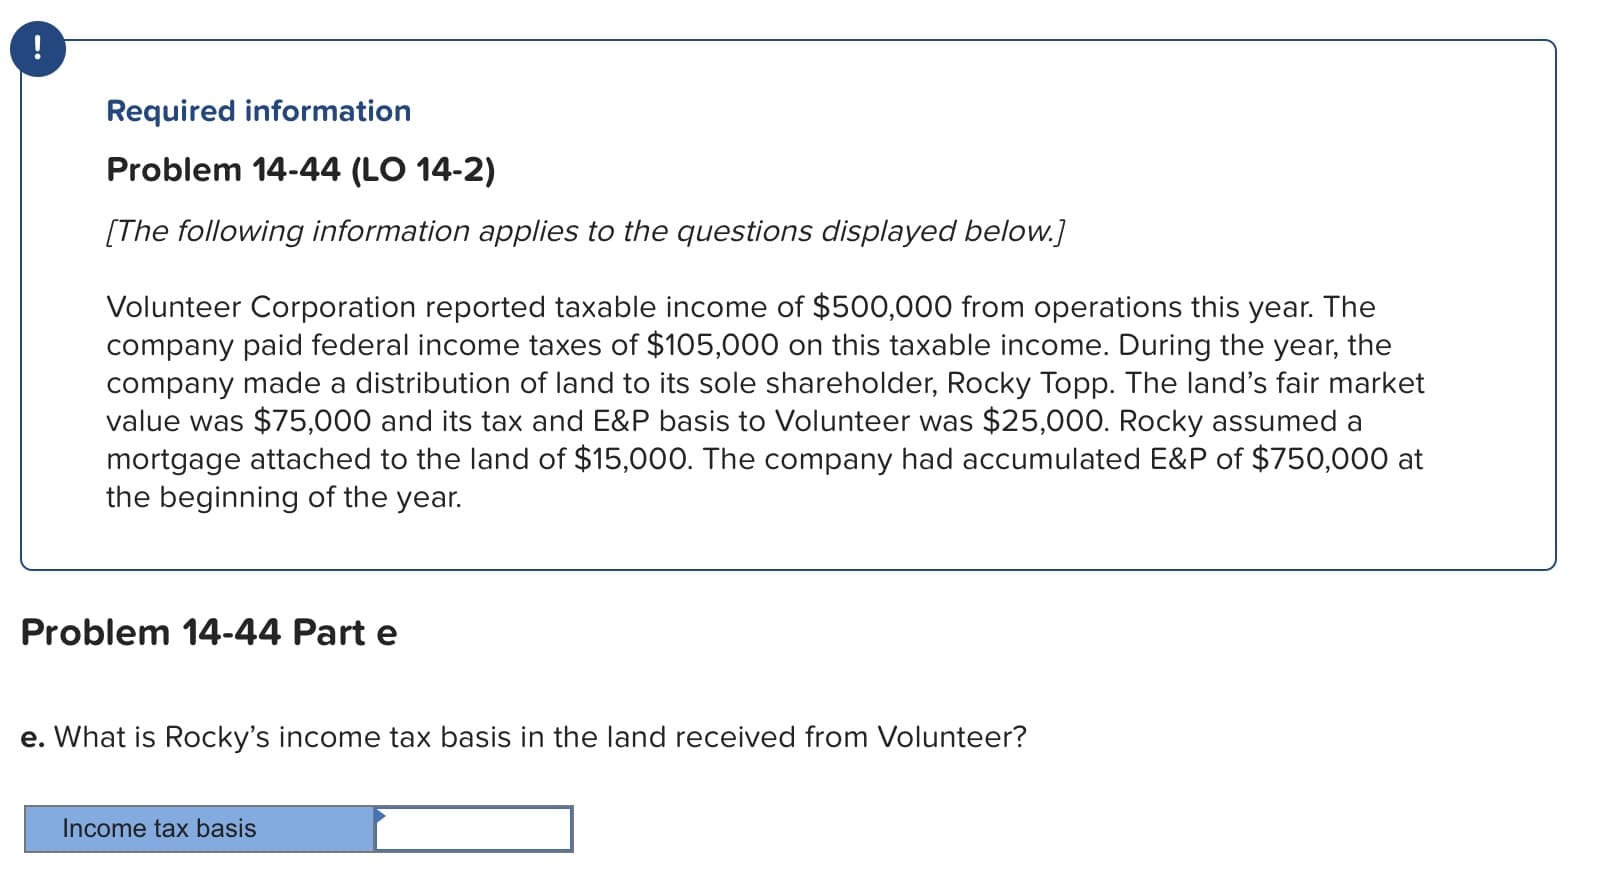 Required information
Problem 14-44 (LO 14-2)
The following information applies to the questions displayed below.]
Volunteer Corporation reported taxable income of $500,000 from operations this year. The
company paid federal income taxes of $105,000 on this taxable income. During the year, the
company made a distribution of land to its sole shareholder, Rocky Topp. The land's fair market
value was $75,000 and its tax and E&P basis to Volunteer was $25,000. Rocky assumed a
mortgage attached to the land of $15,000. The company had accumulated E&P of $750,000 at
the beginning of the year.
Problem 14-44 Part e
e. What is Rocky's income tax basis in the land received from Volunteer?
Income tax basis
